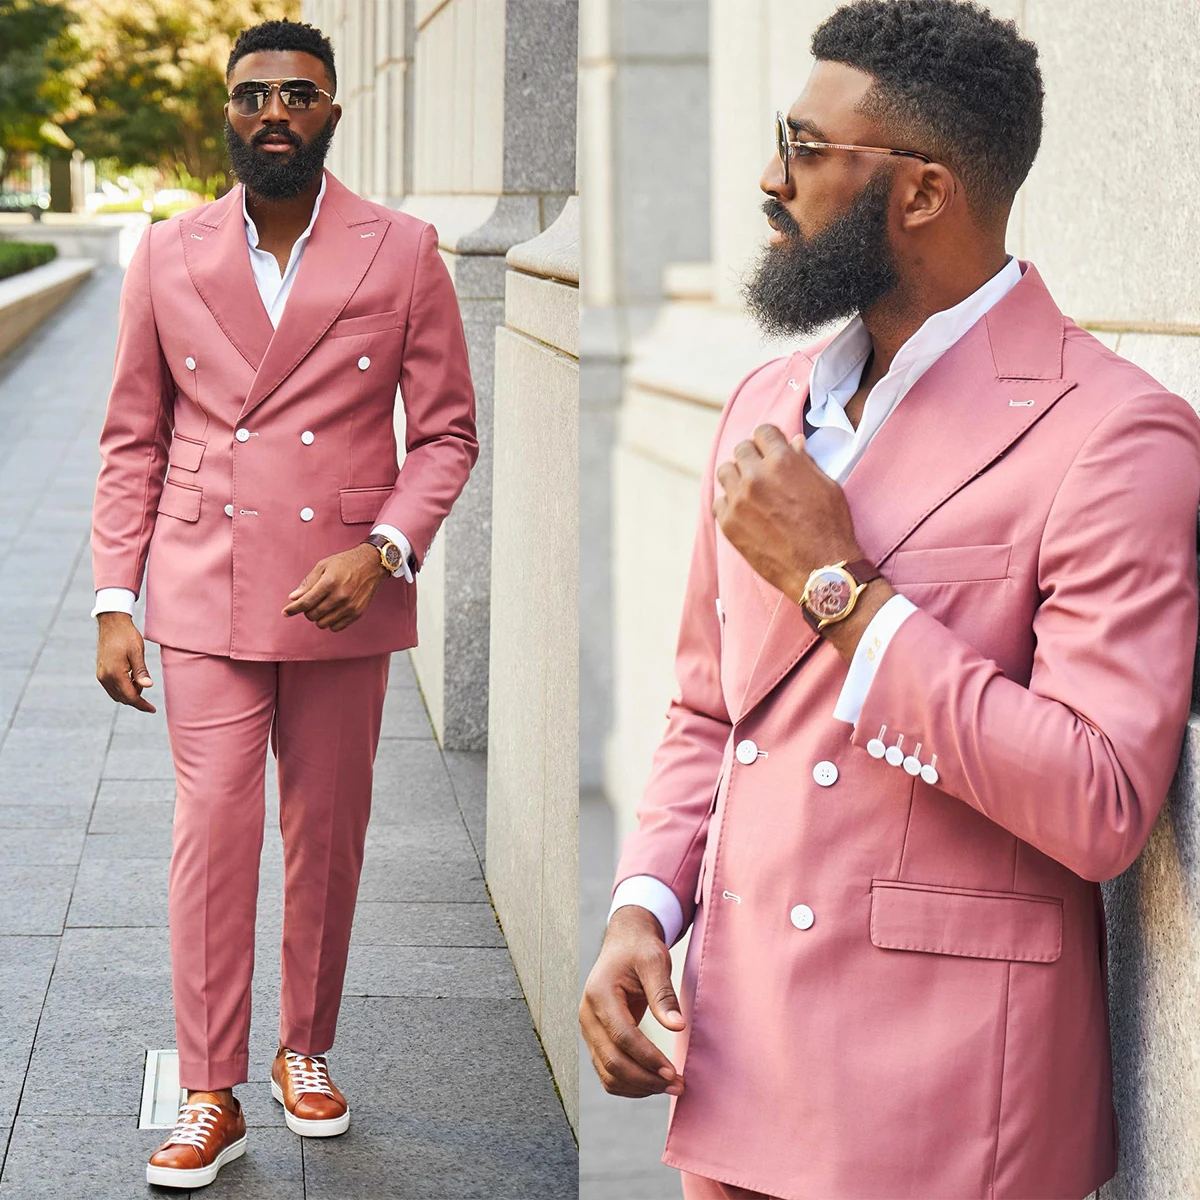 

Casual Wedding Men Suits Tuxedos Groom Wear Pink Peaked Lapel Formal Suit Custom Size High Quality 3 Pieces Blazer+Vest+Pant